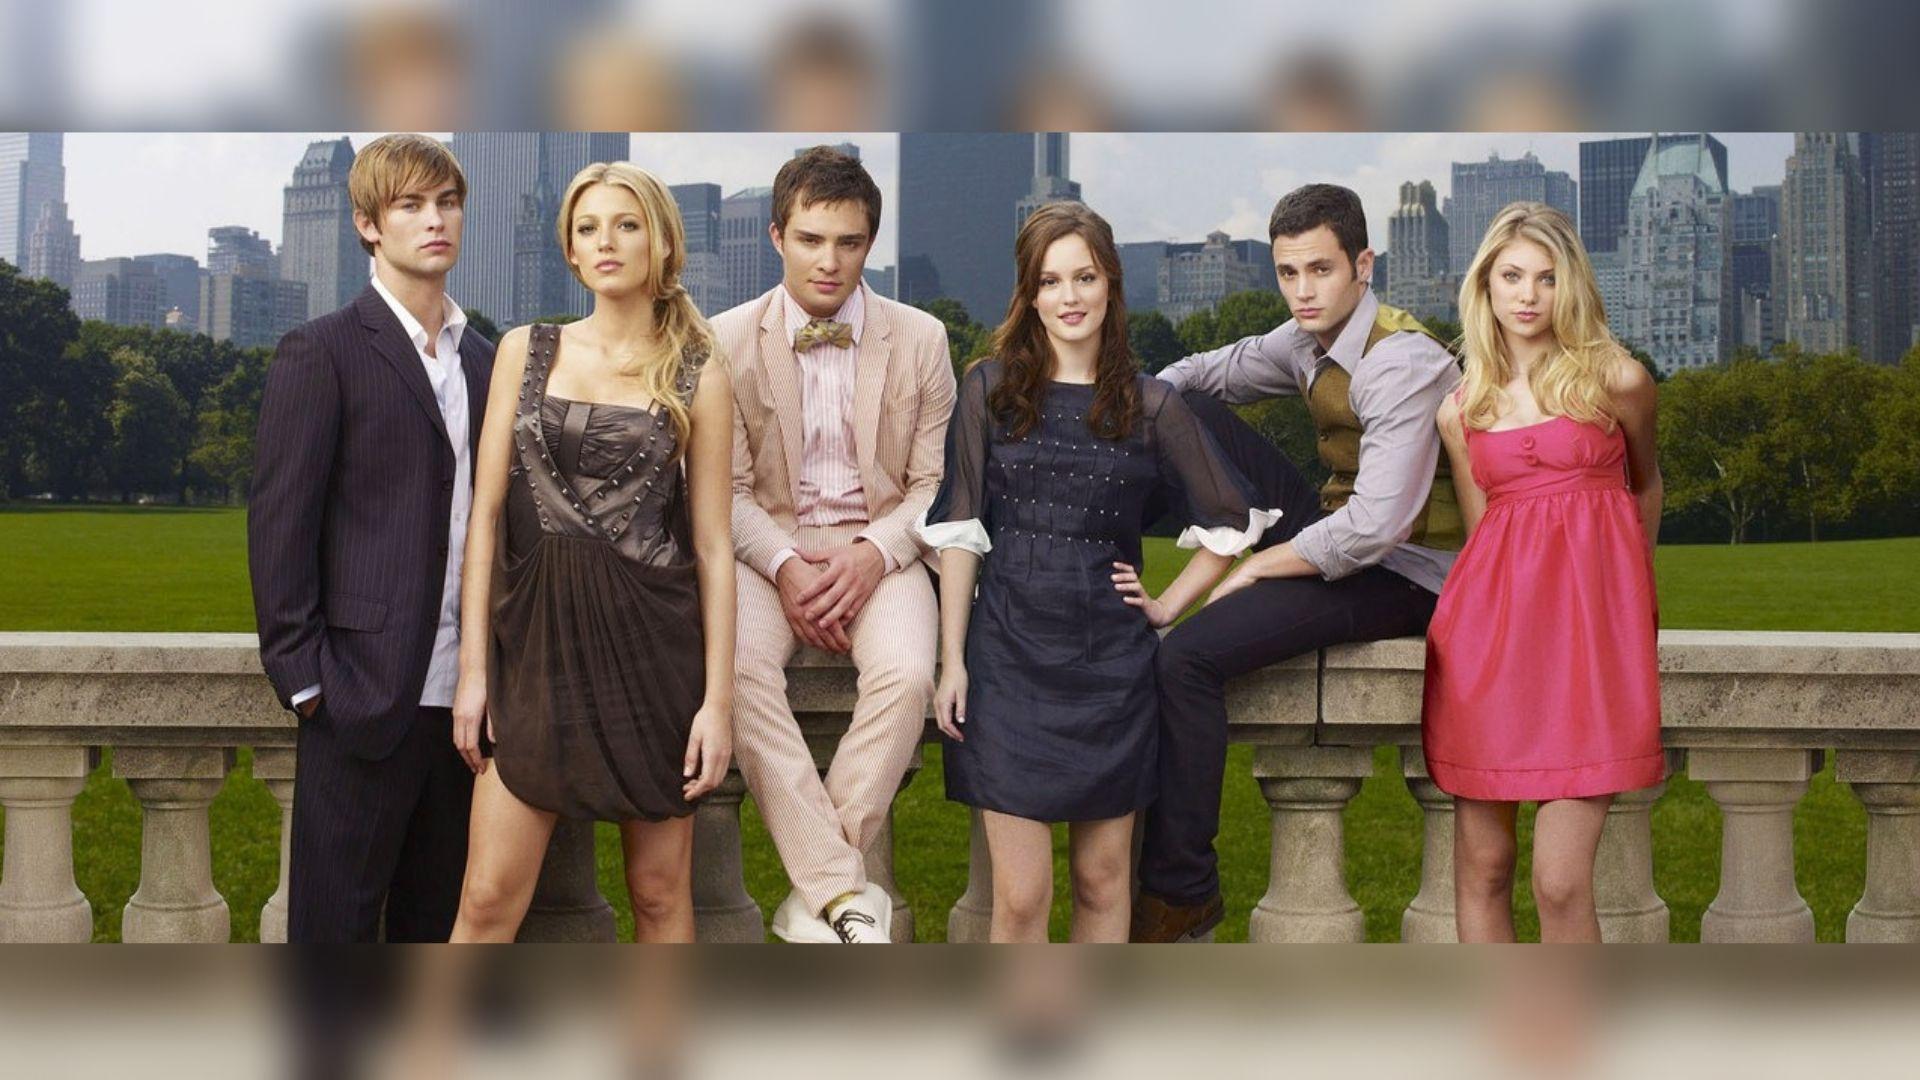 Gossip Girl Reboot: Here's a List of Five Shows We'd Want to Make a